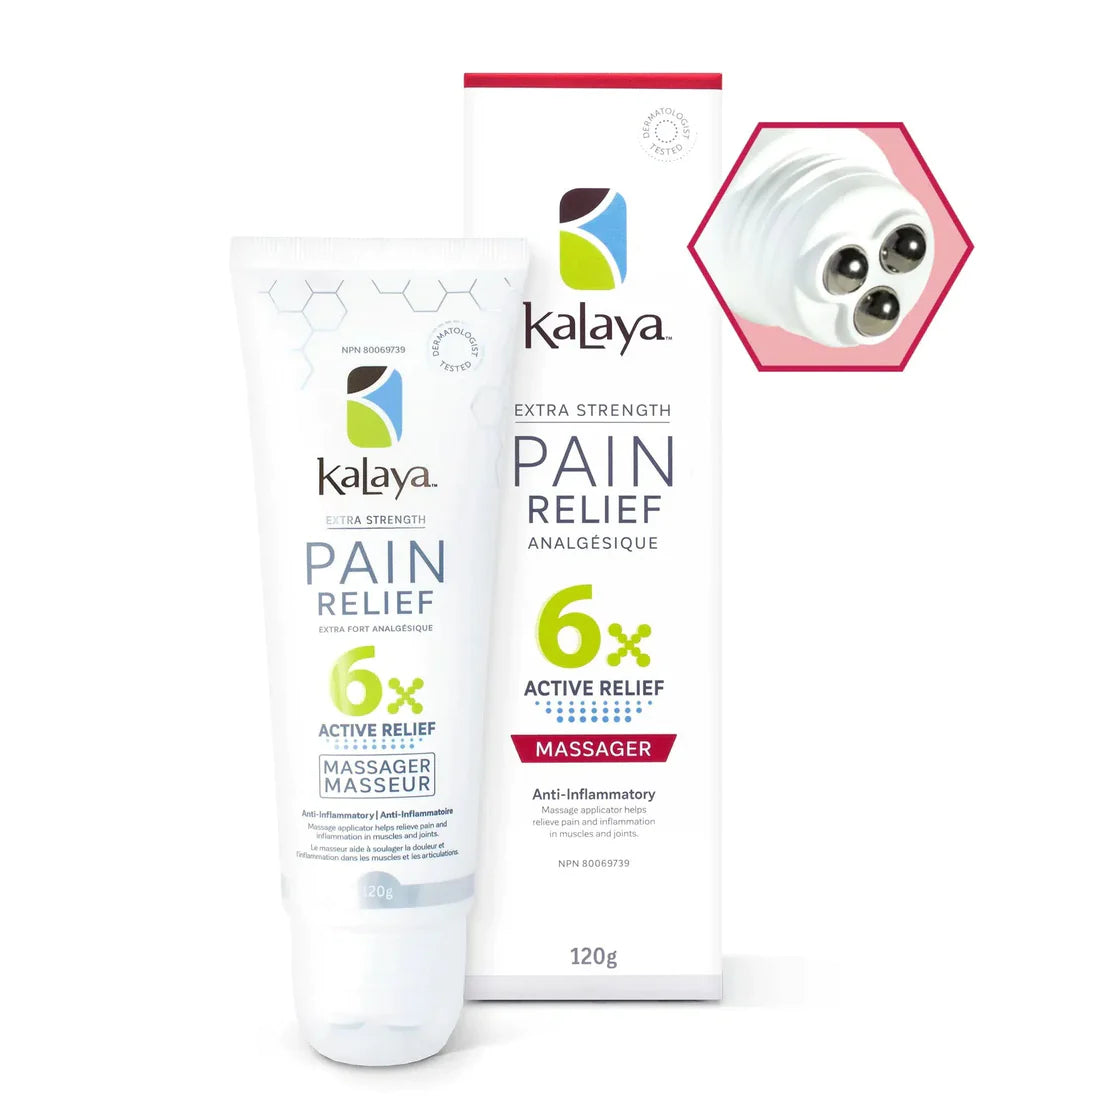 Kalaya Pain Relief Cream with massager roller ball bearings to rub in - Made in Canada